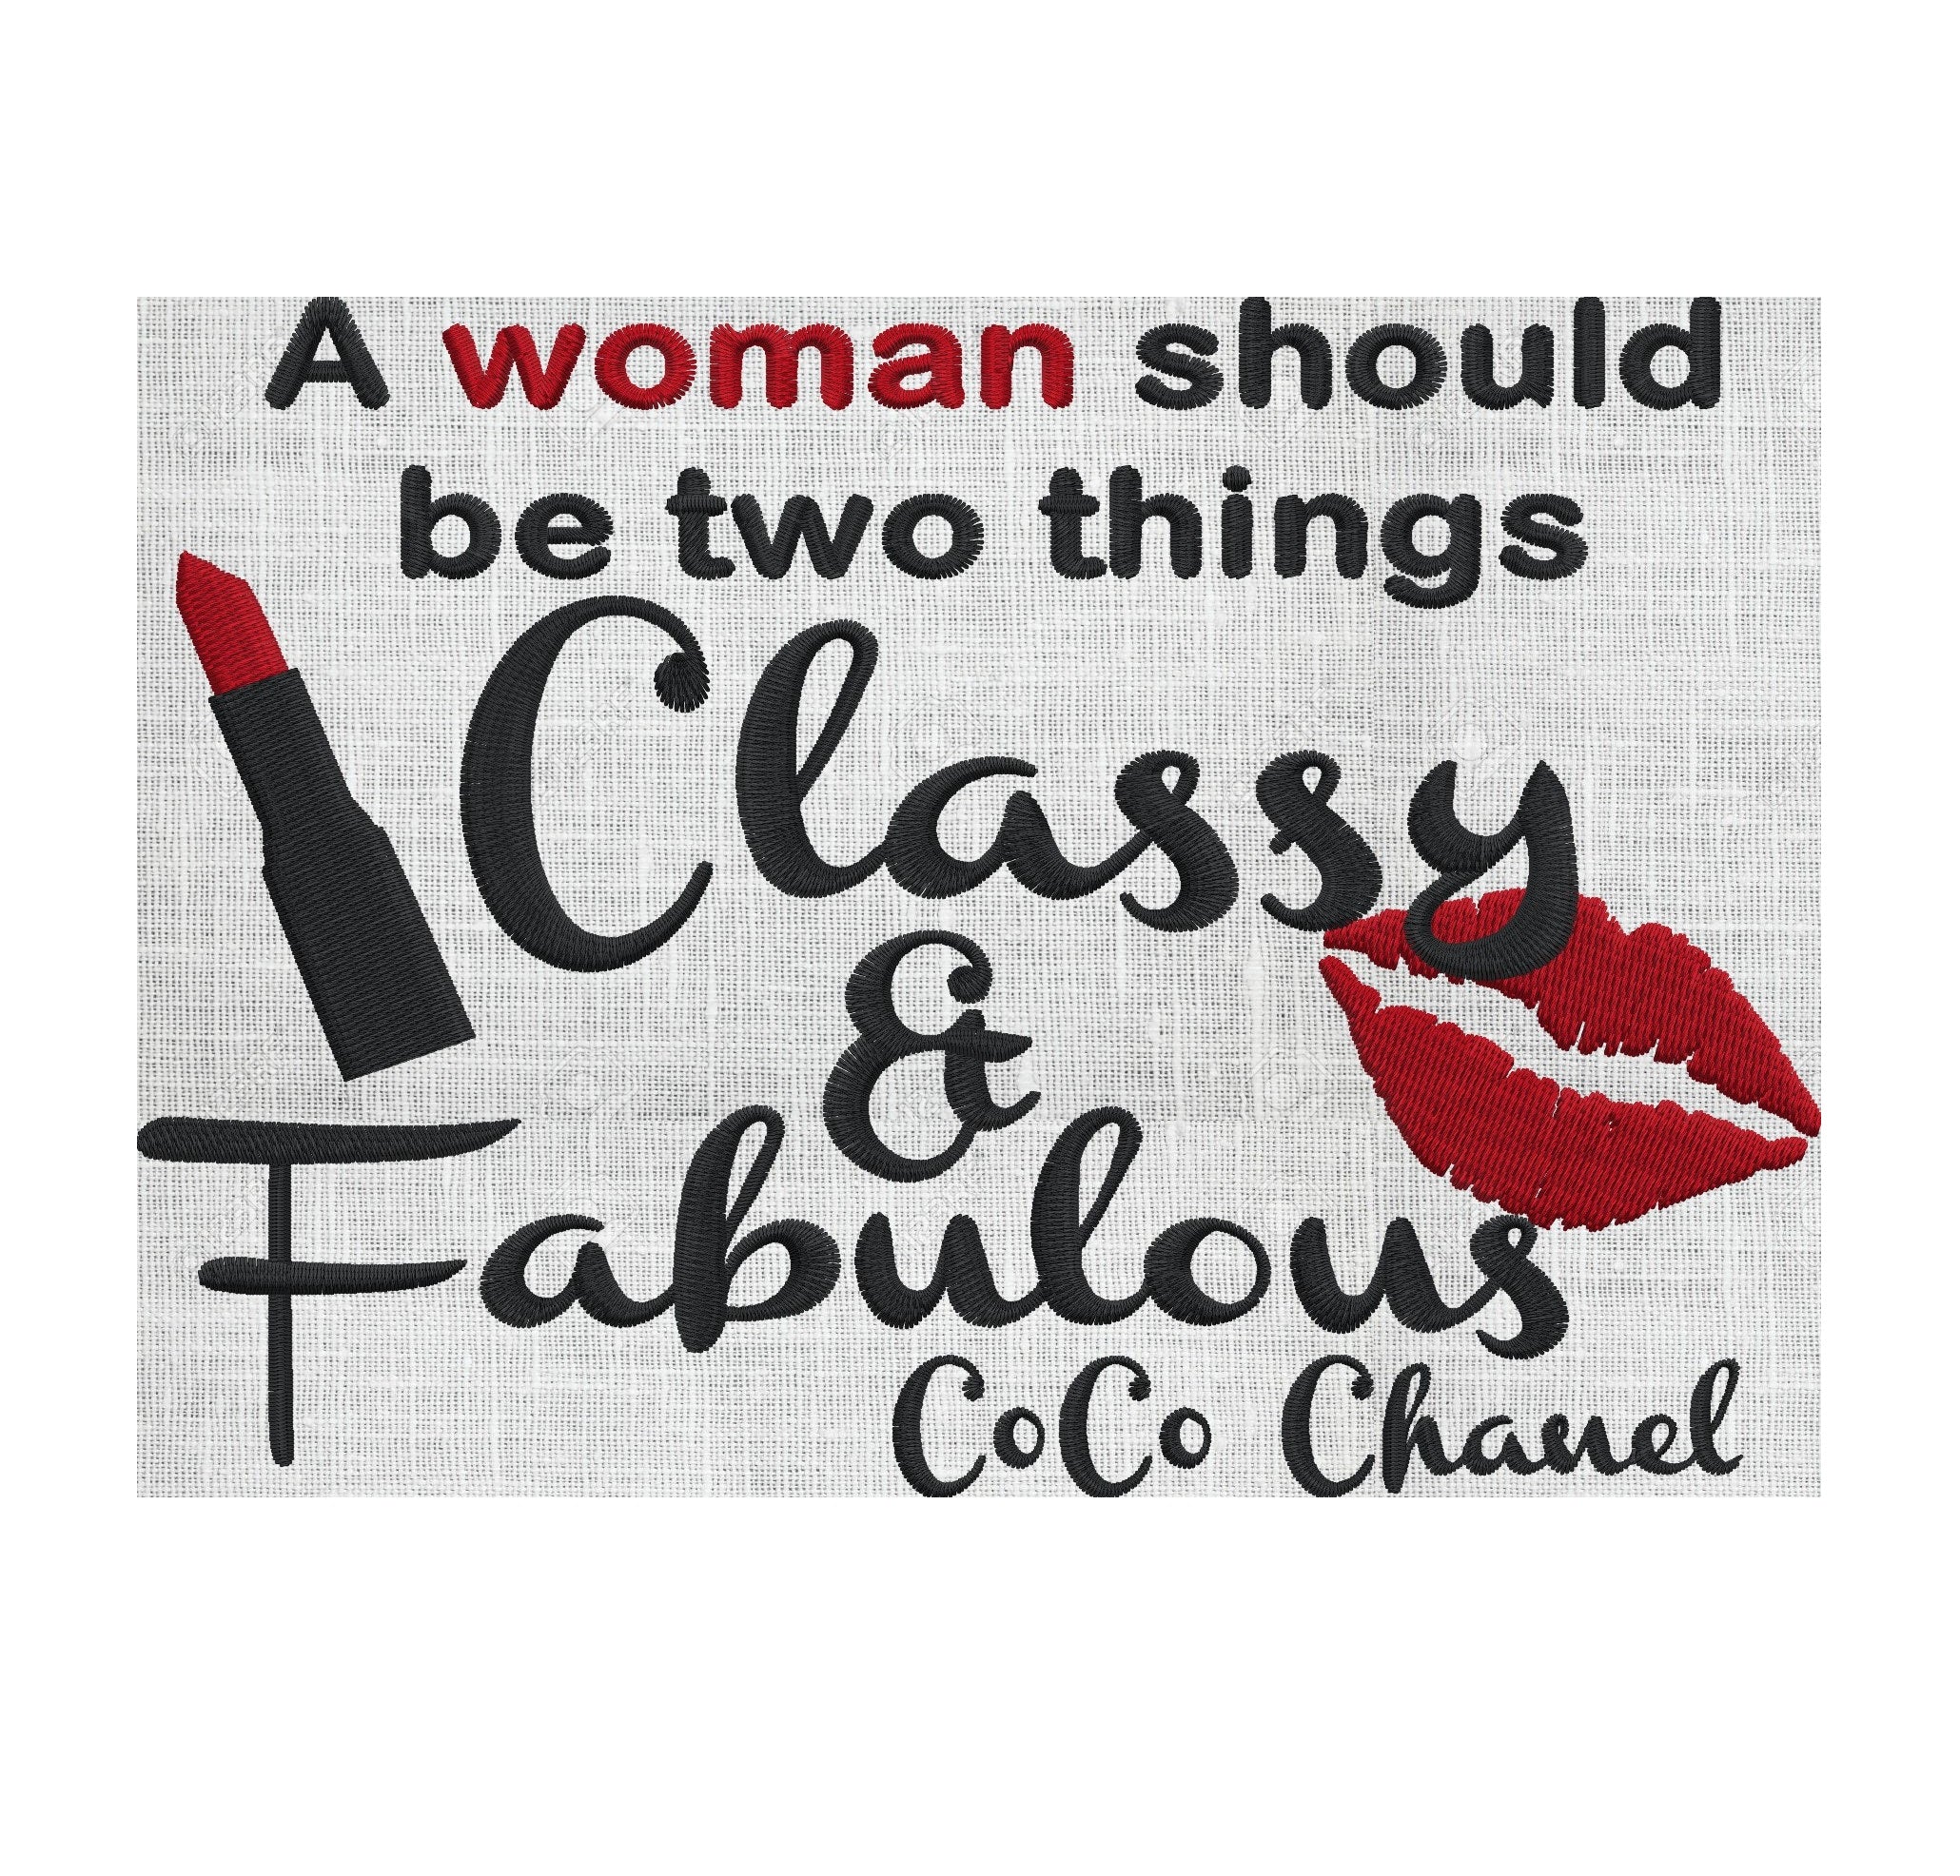  Coco Chanel Quote Poster - A Girl Should Be Two Things